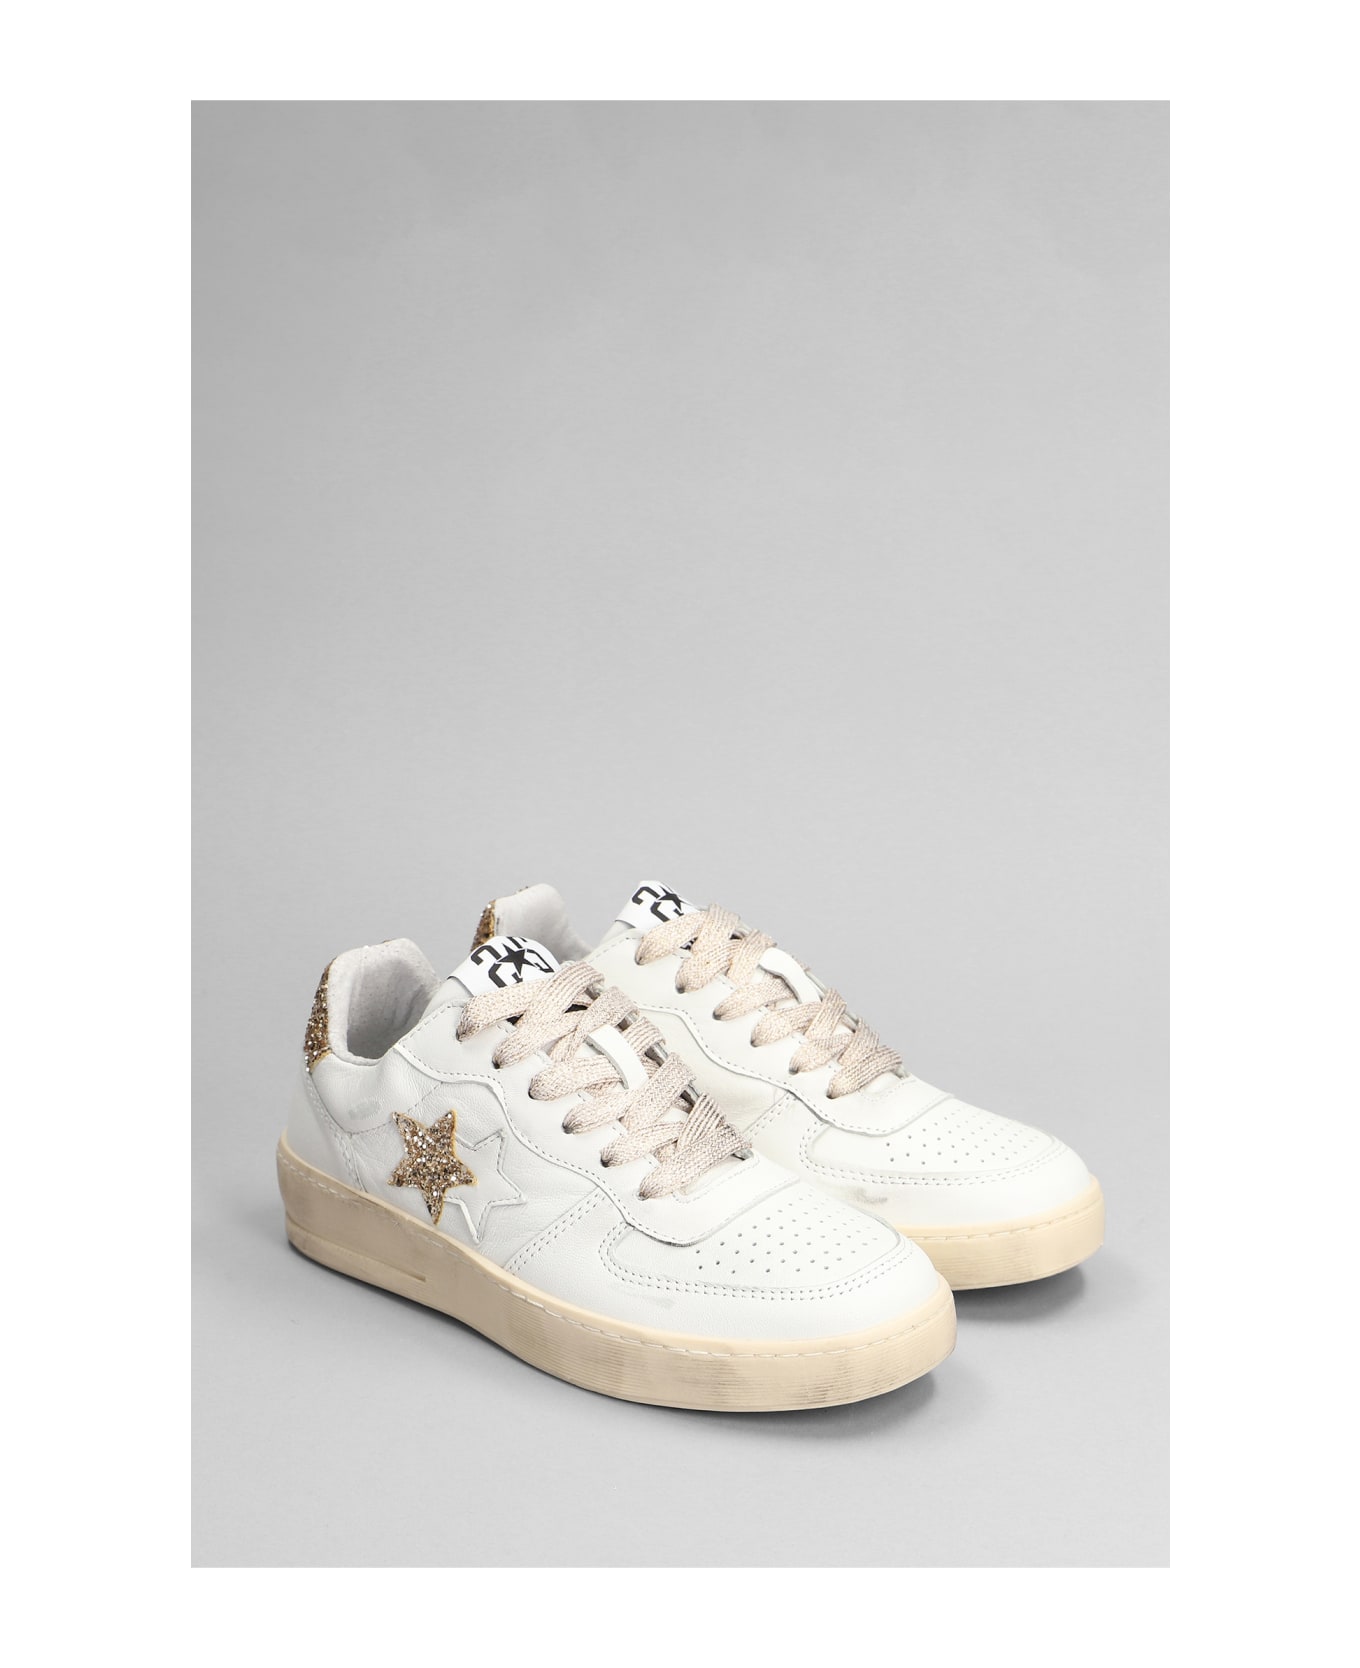 2Star Padel Star Sneakers In White Leather - white